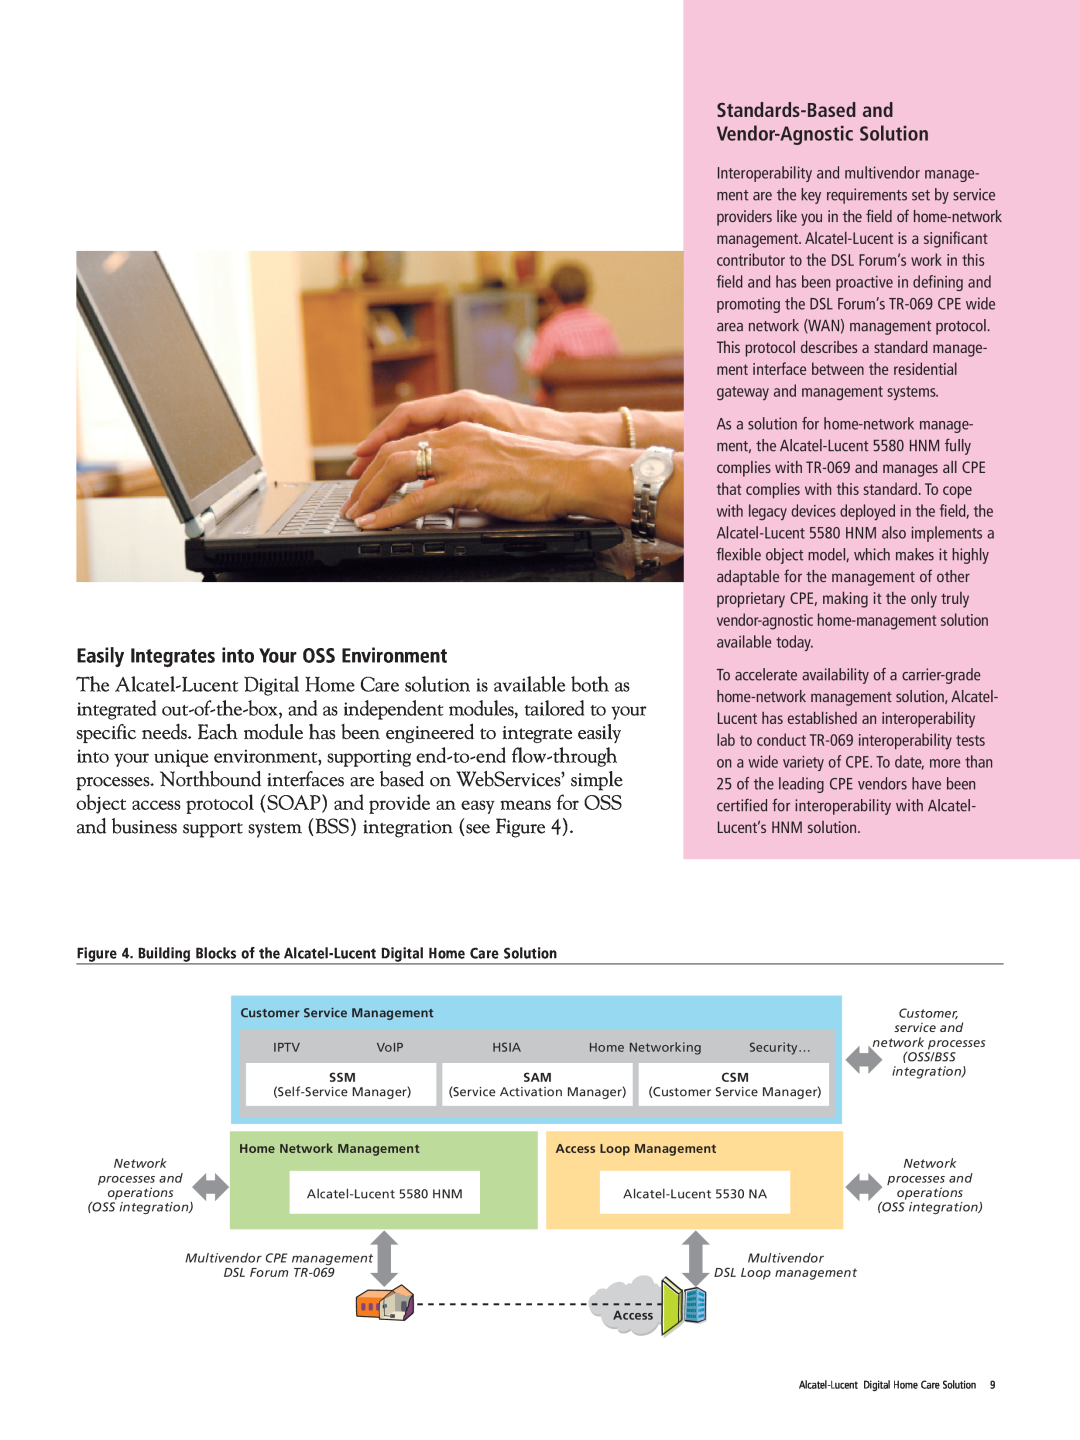 Alcatel-Lucent Digital Home Care Solution manual Easily Integrates into Your OSS Environment, Access 